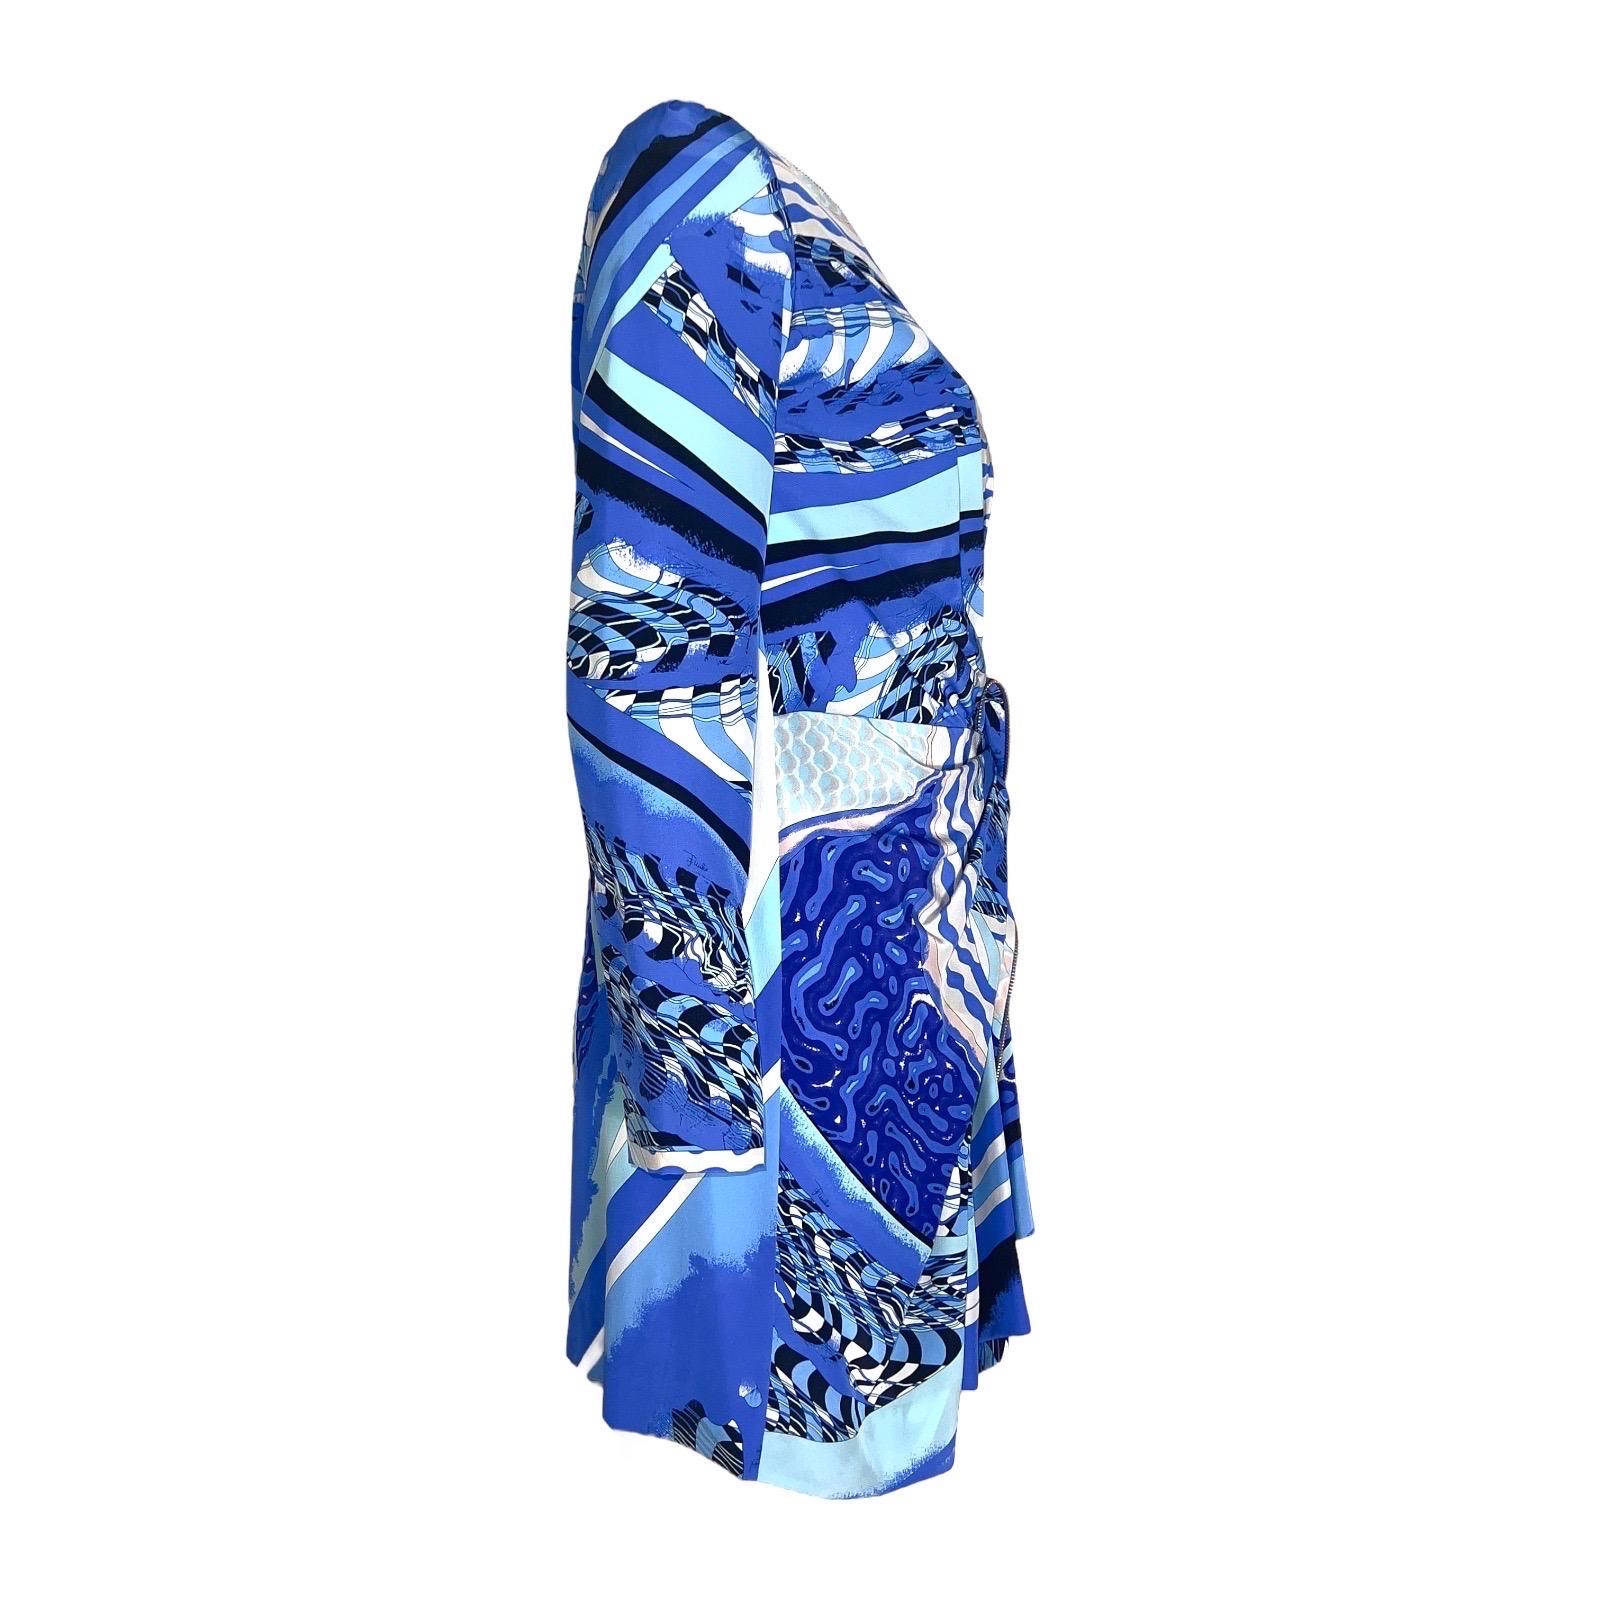 A stunning piece by Emilio Pucci
Made of finest printed silk
Signature print signed with 